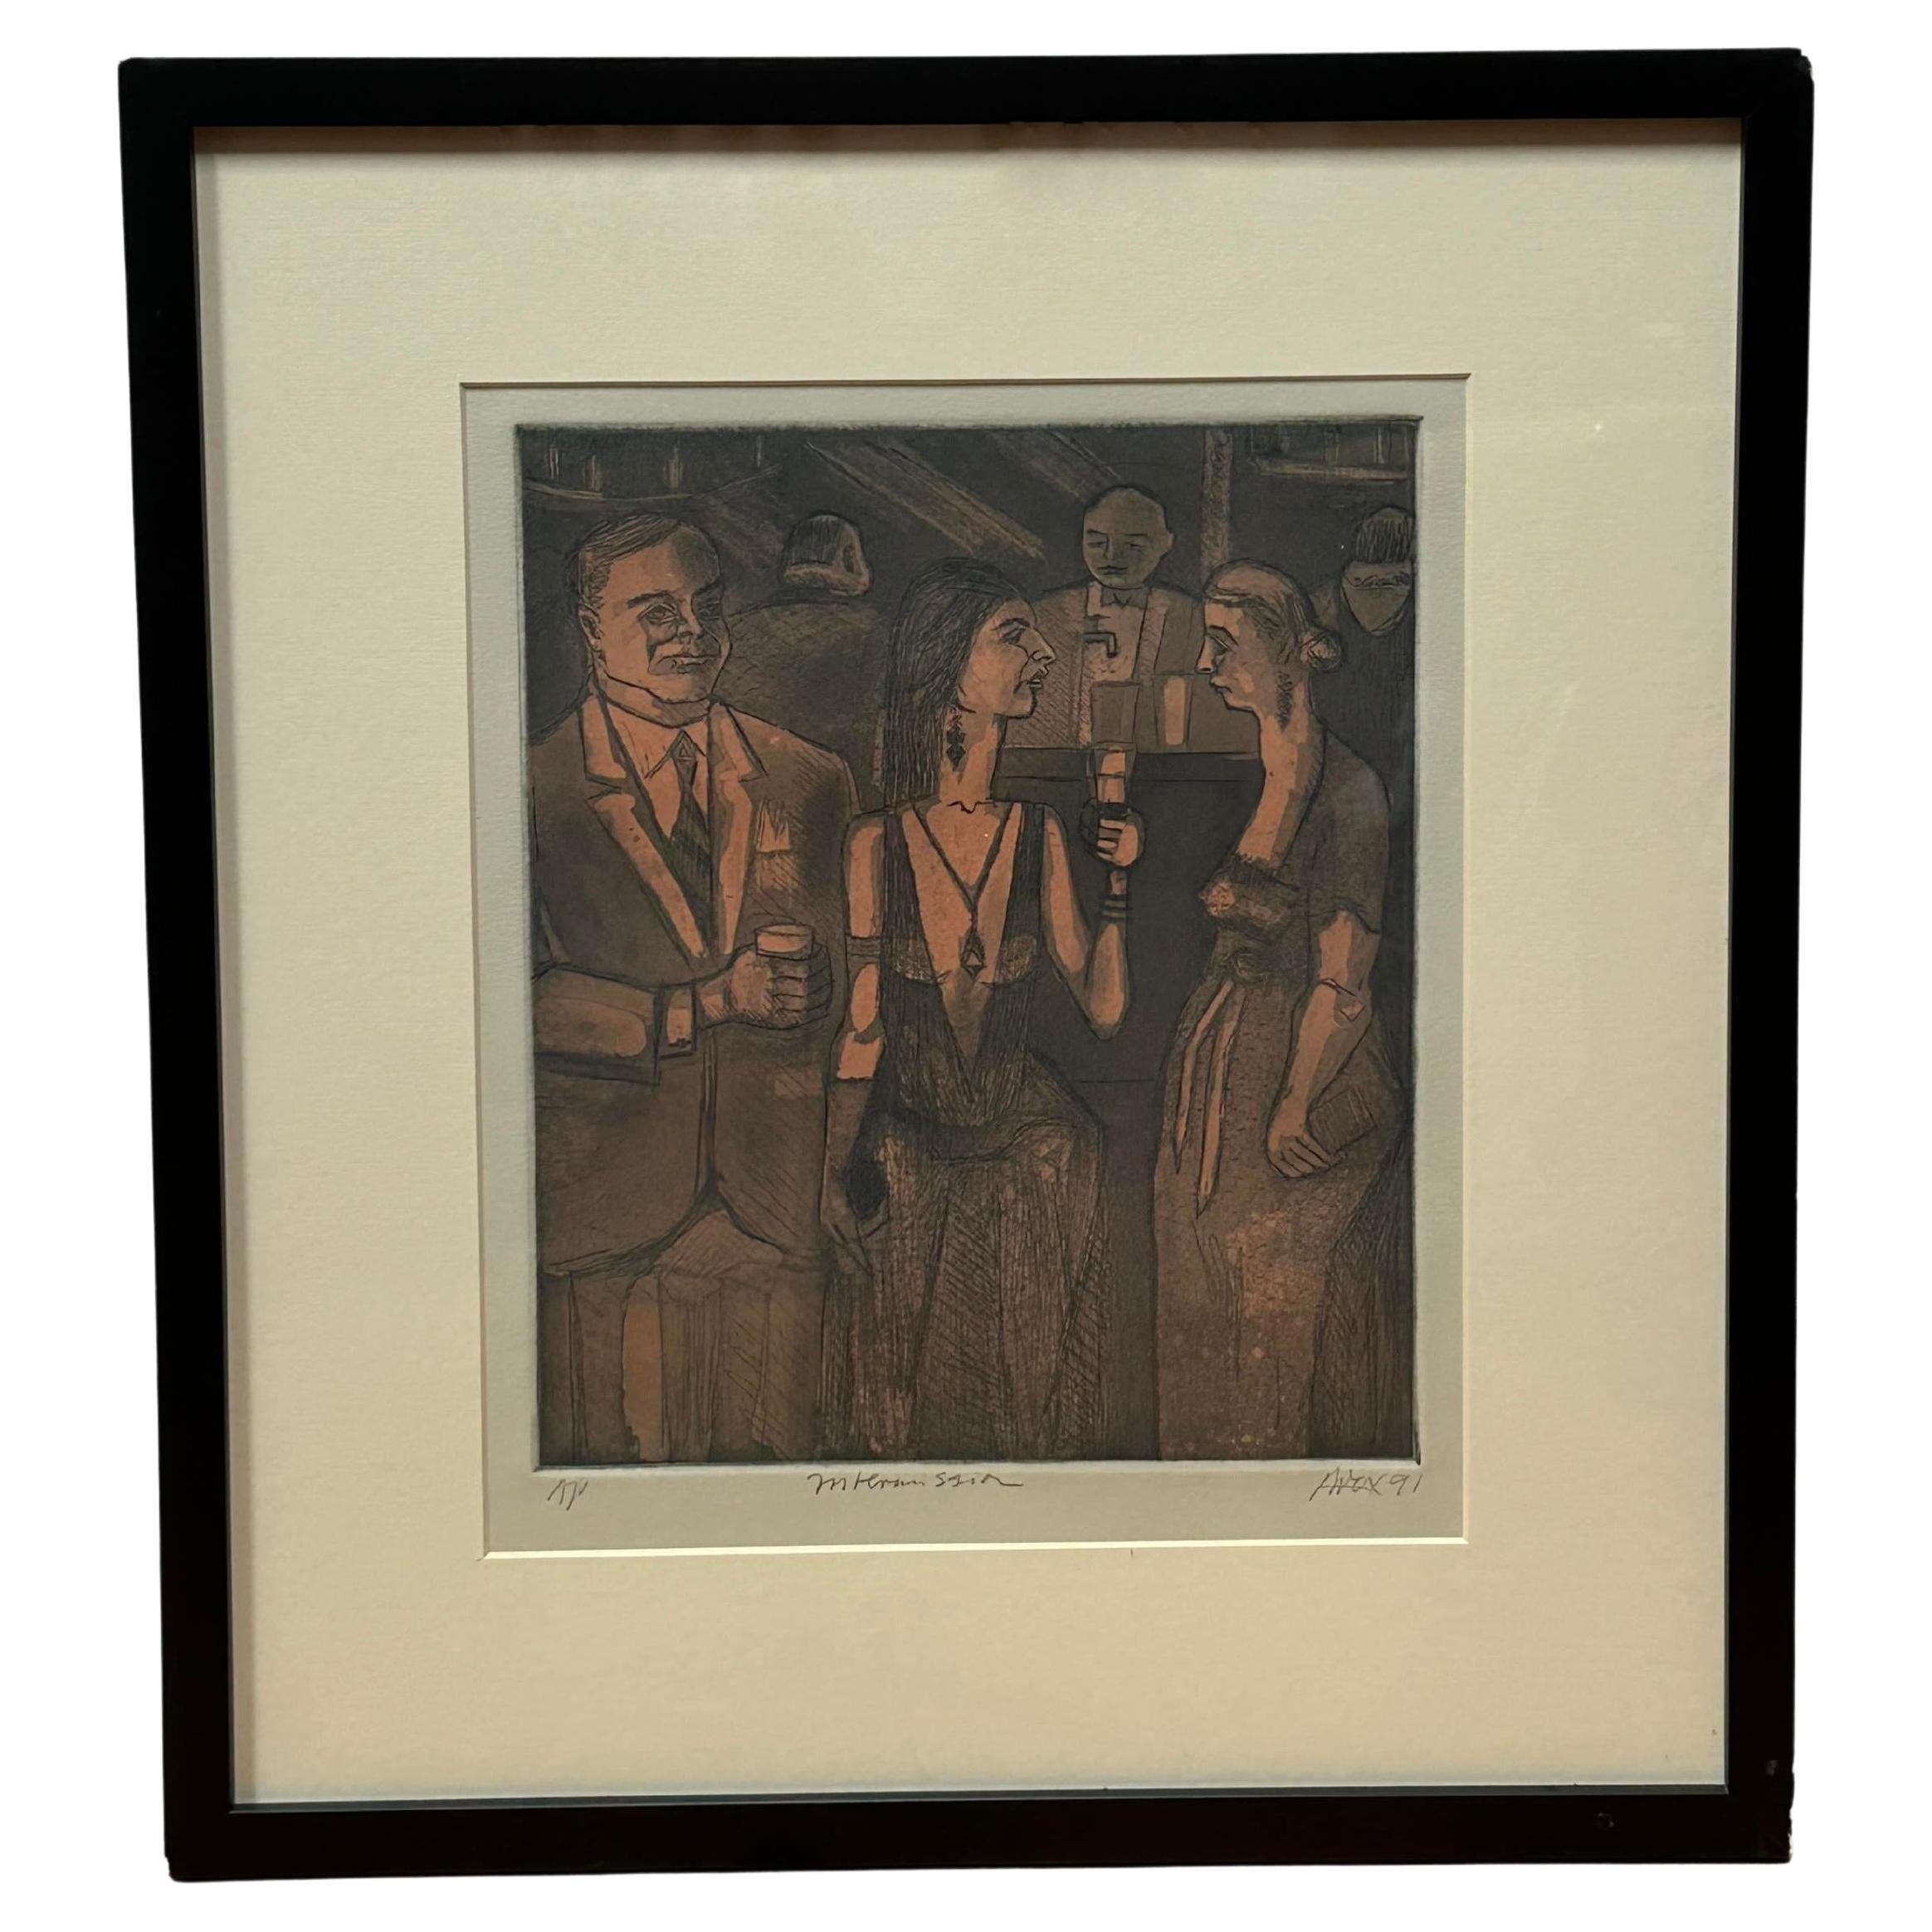 This lithograph by Dave Fox from 1991 features the artist's signature, lithograph number (1/70), and title 